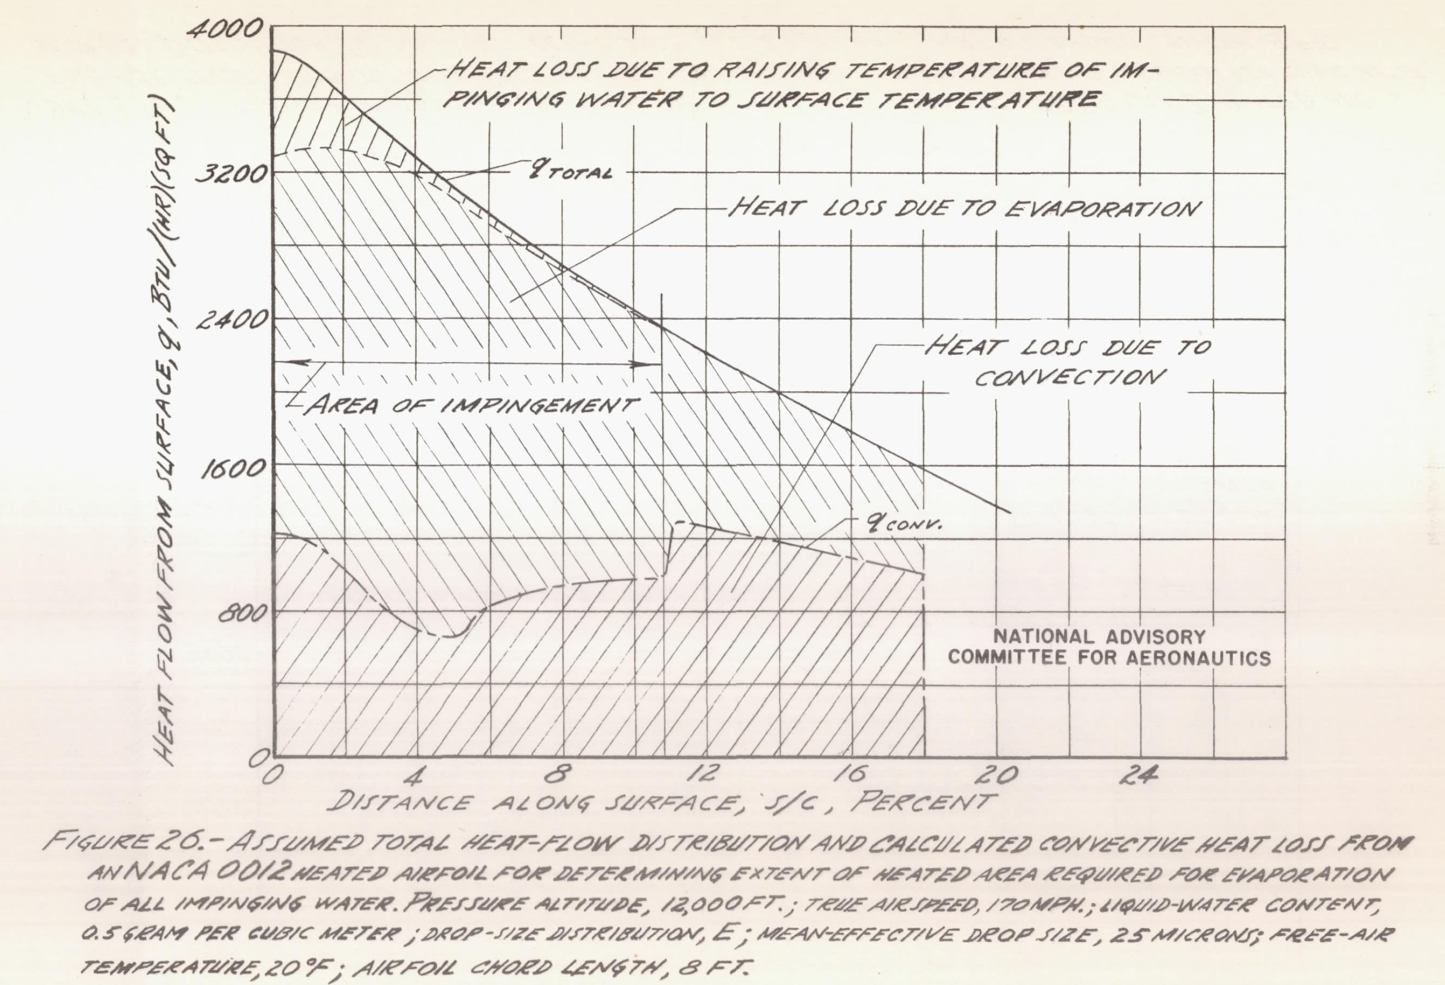 Figure 26. Assumed total heat-flow distribution and calculated convective heat loss from an NACA 0012 heated airfoil for determining extent of heated area required for evaporation of all impinging water. 
Pressure altitude, 12000 ft. True airspeed, 170 mph. Liquid-water content, 0.5 grams per cubic meter. 
Drop-size distribution, E. Mean-effective drop size, 25 microns. Free-air temperature, 20 degrees F.
Airfoil chord length, 8 ft.